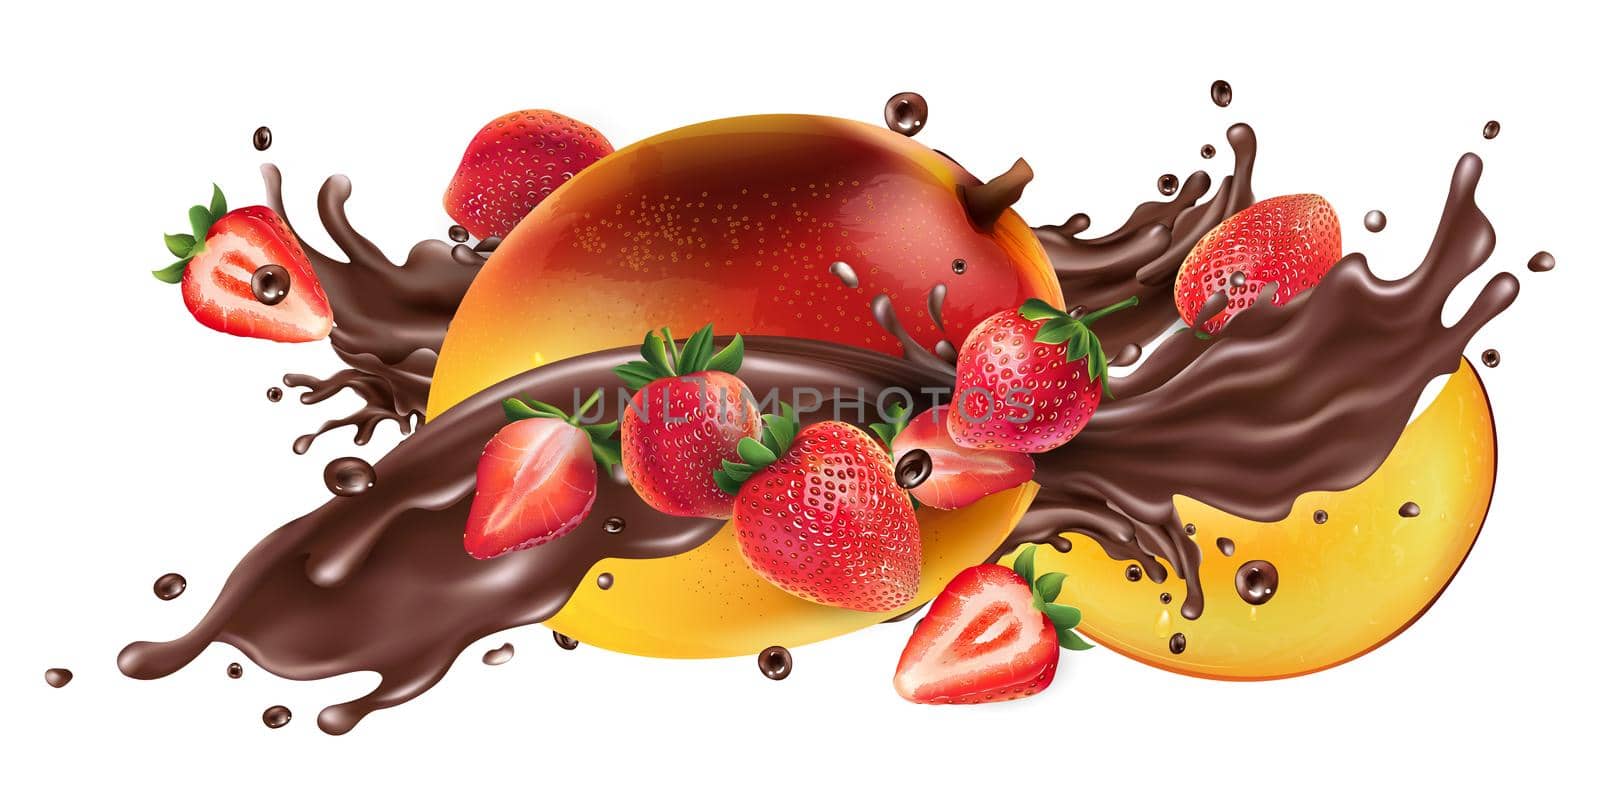 Splash of liquid chocolate and fresh mango with strawberries. by ConceptCafe